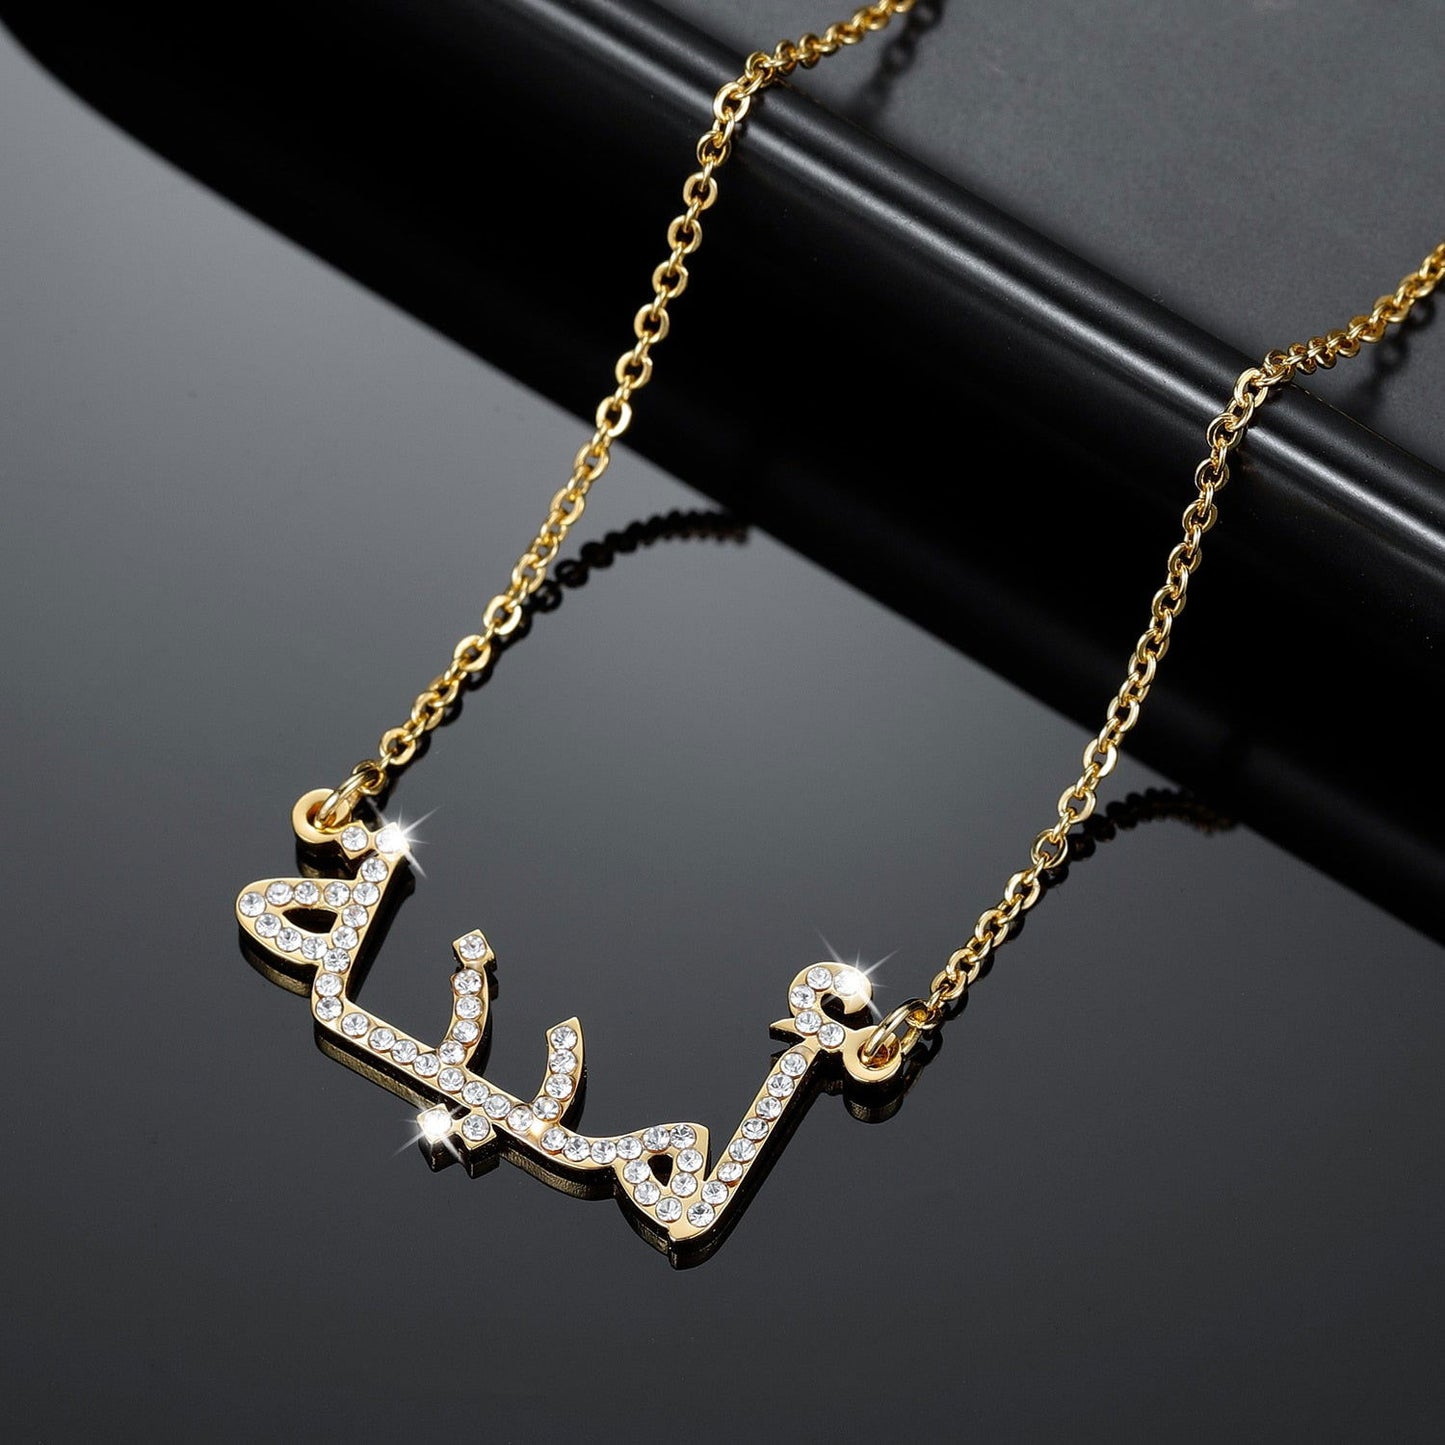 Personalized Arabic Crystal Name Necklace - Arabic Name Jewellery